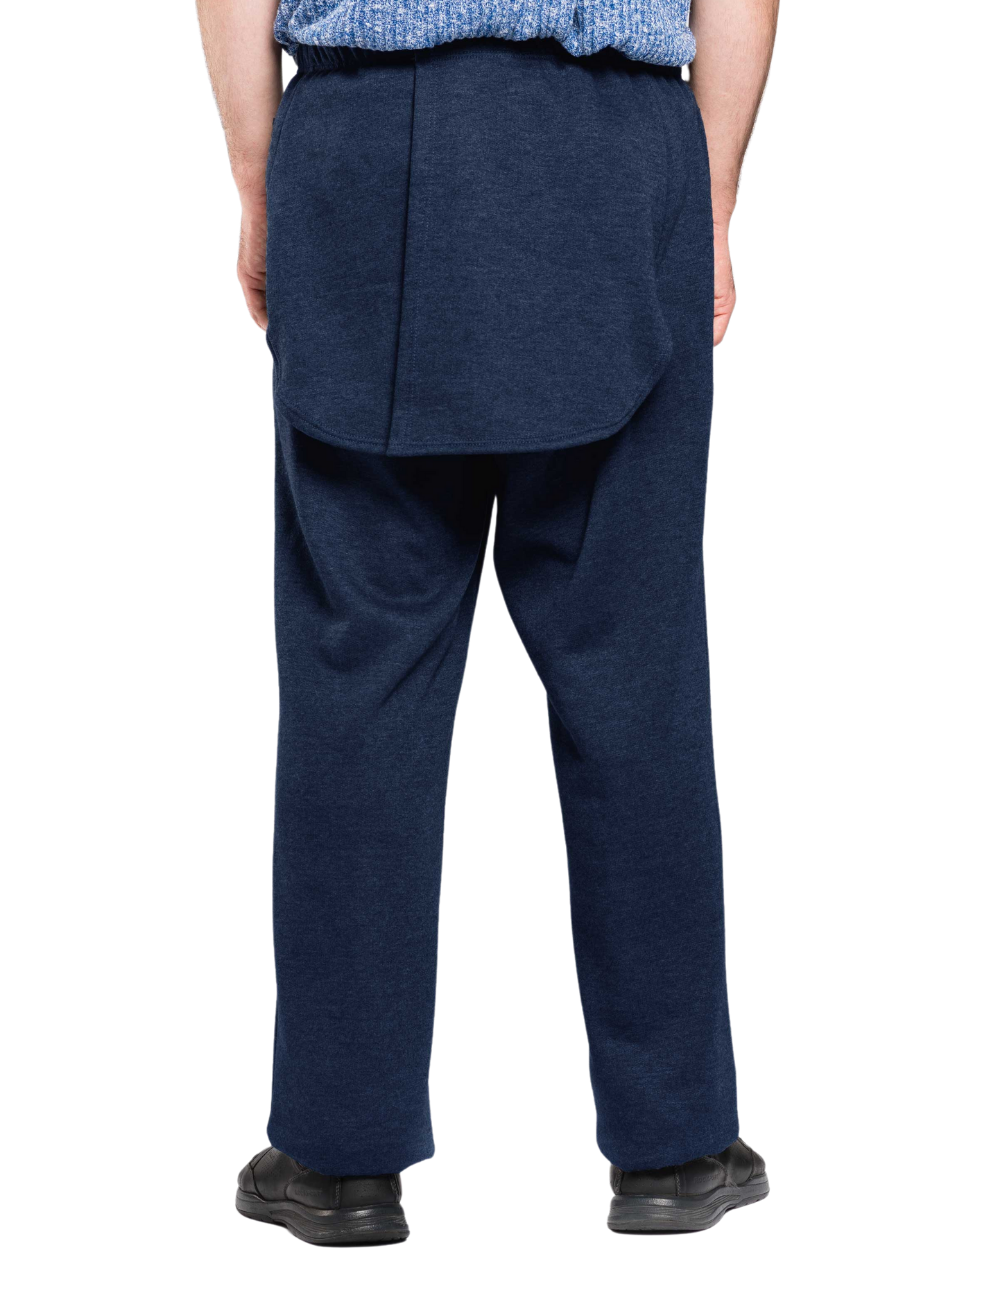 Side VELCRO® Knit Pants Adaptive Clothing for Seniors, Disabled